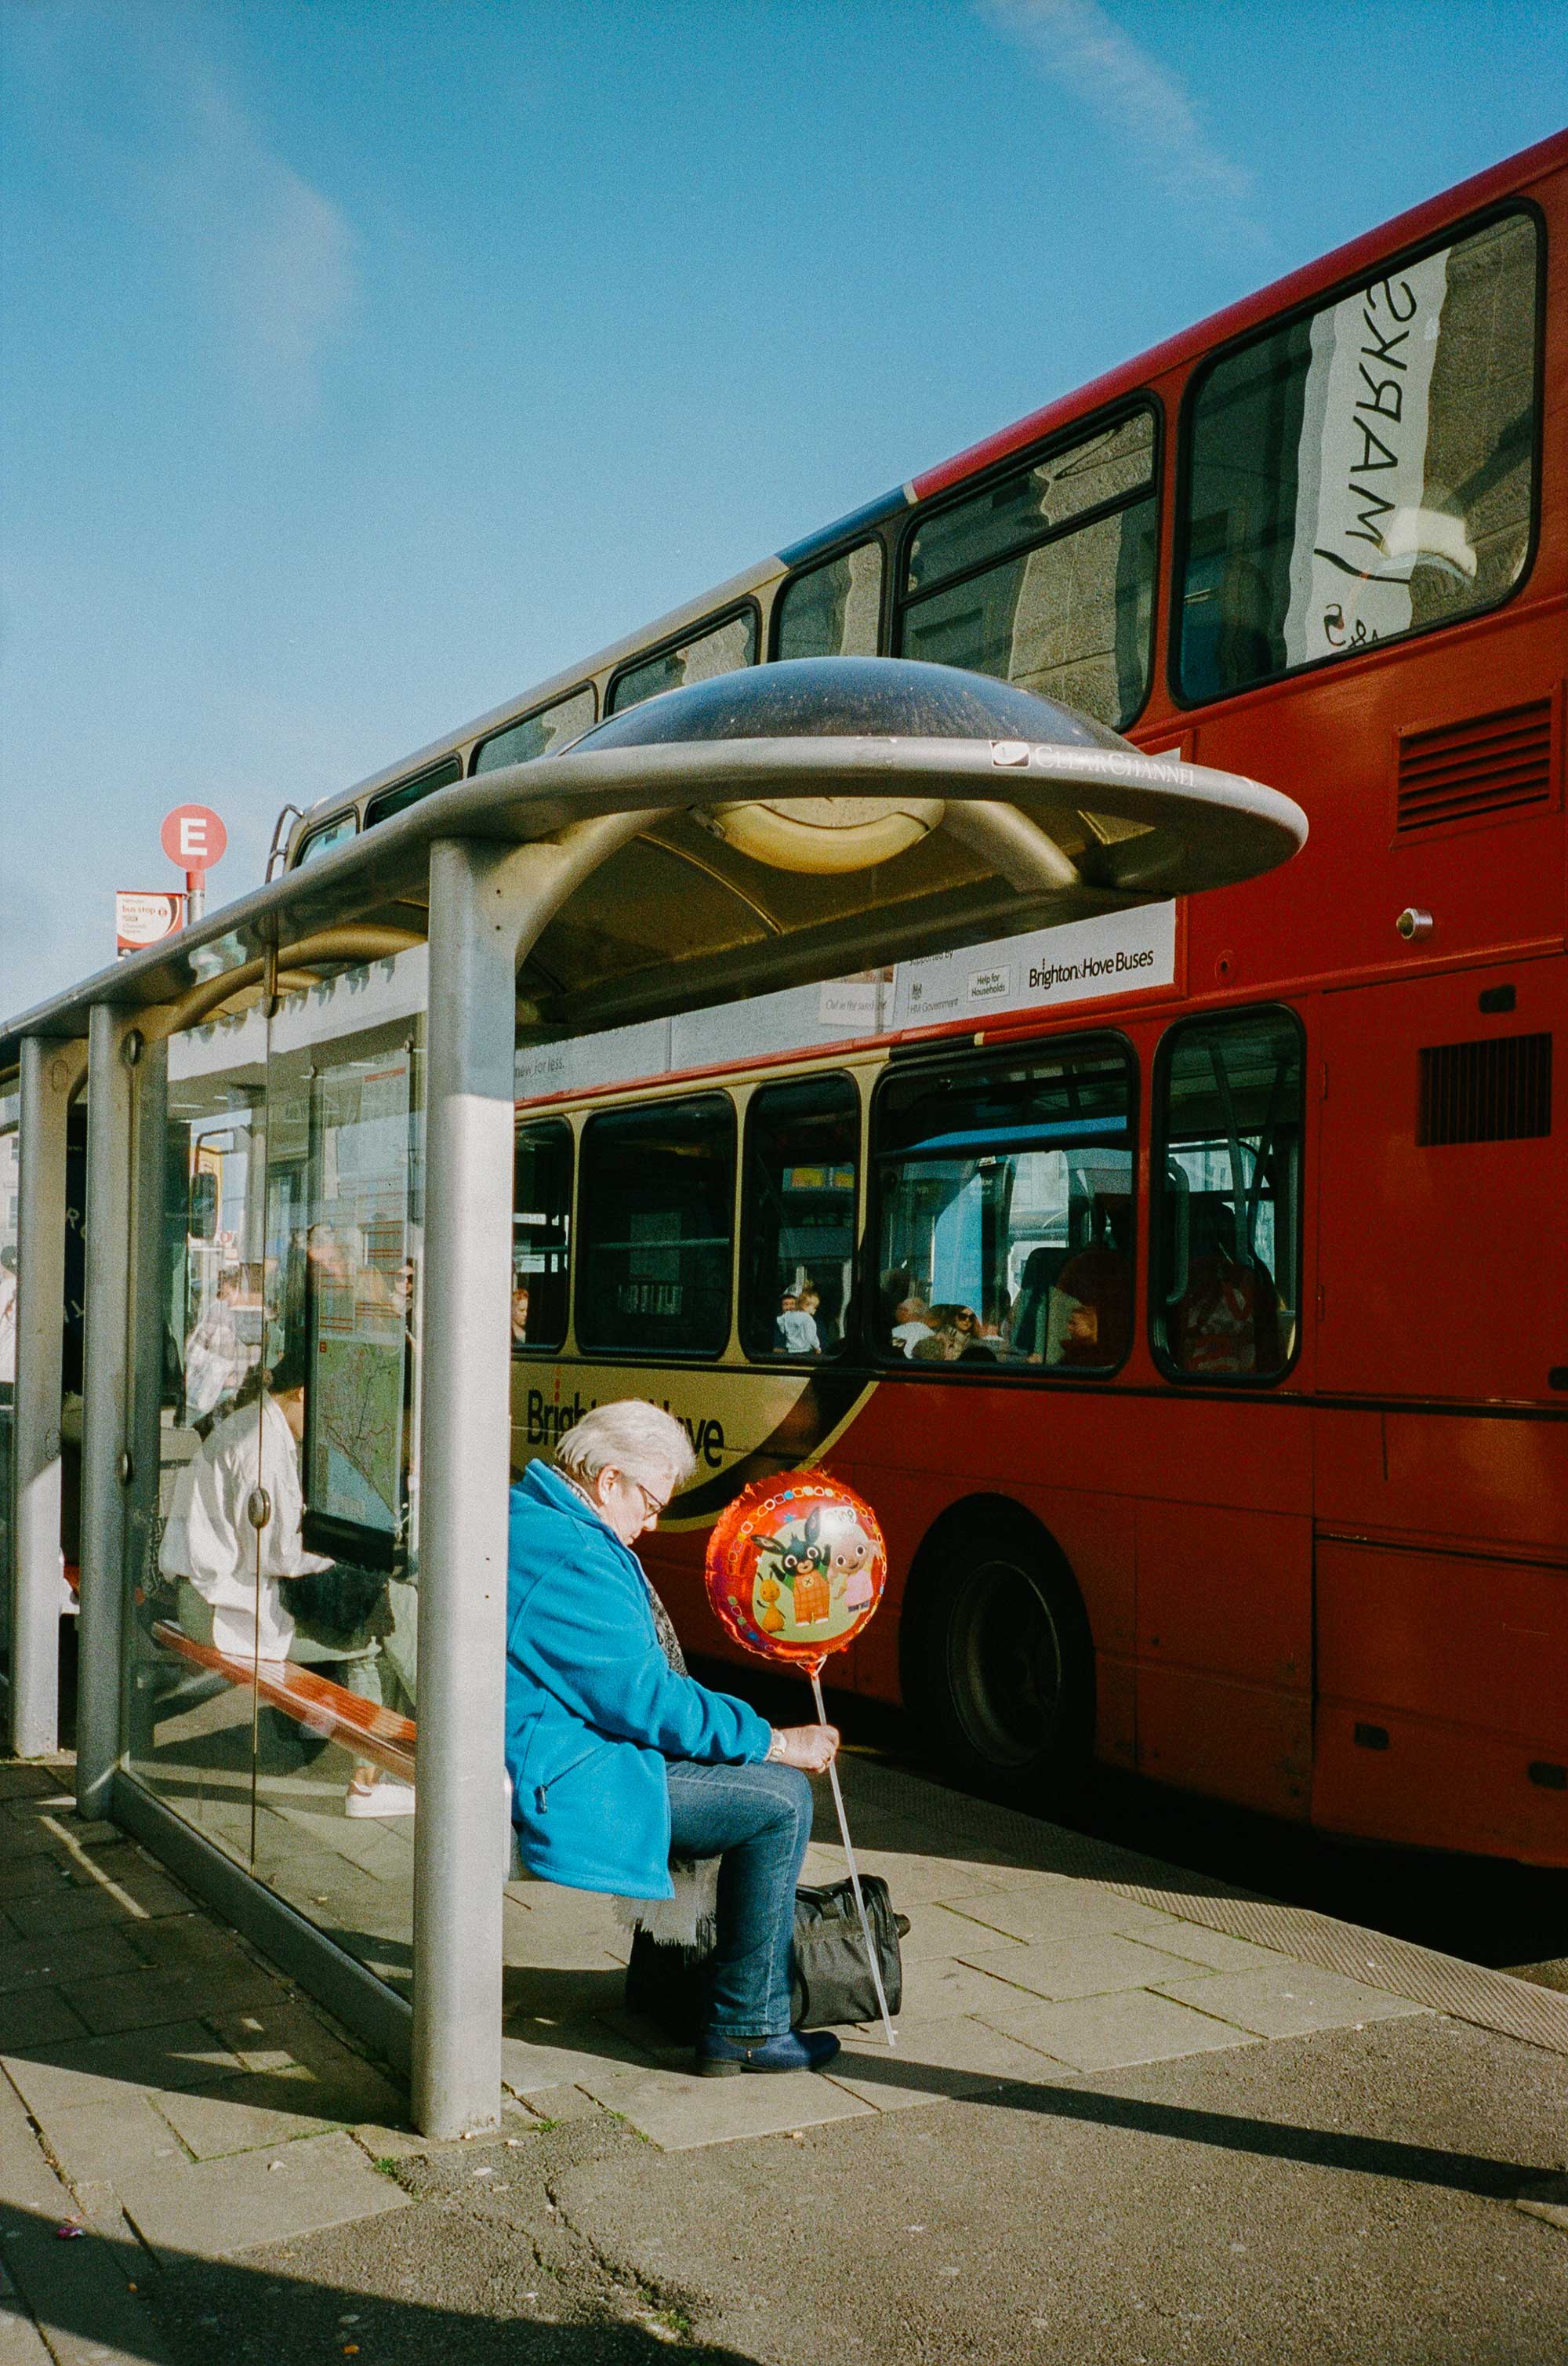 A woman sitting at a bus stop holding a balloon on a stick.